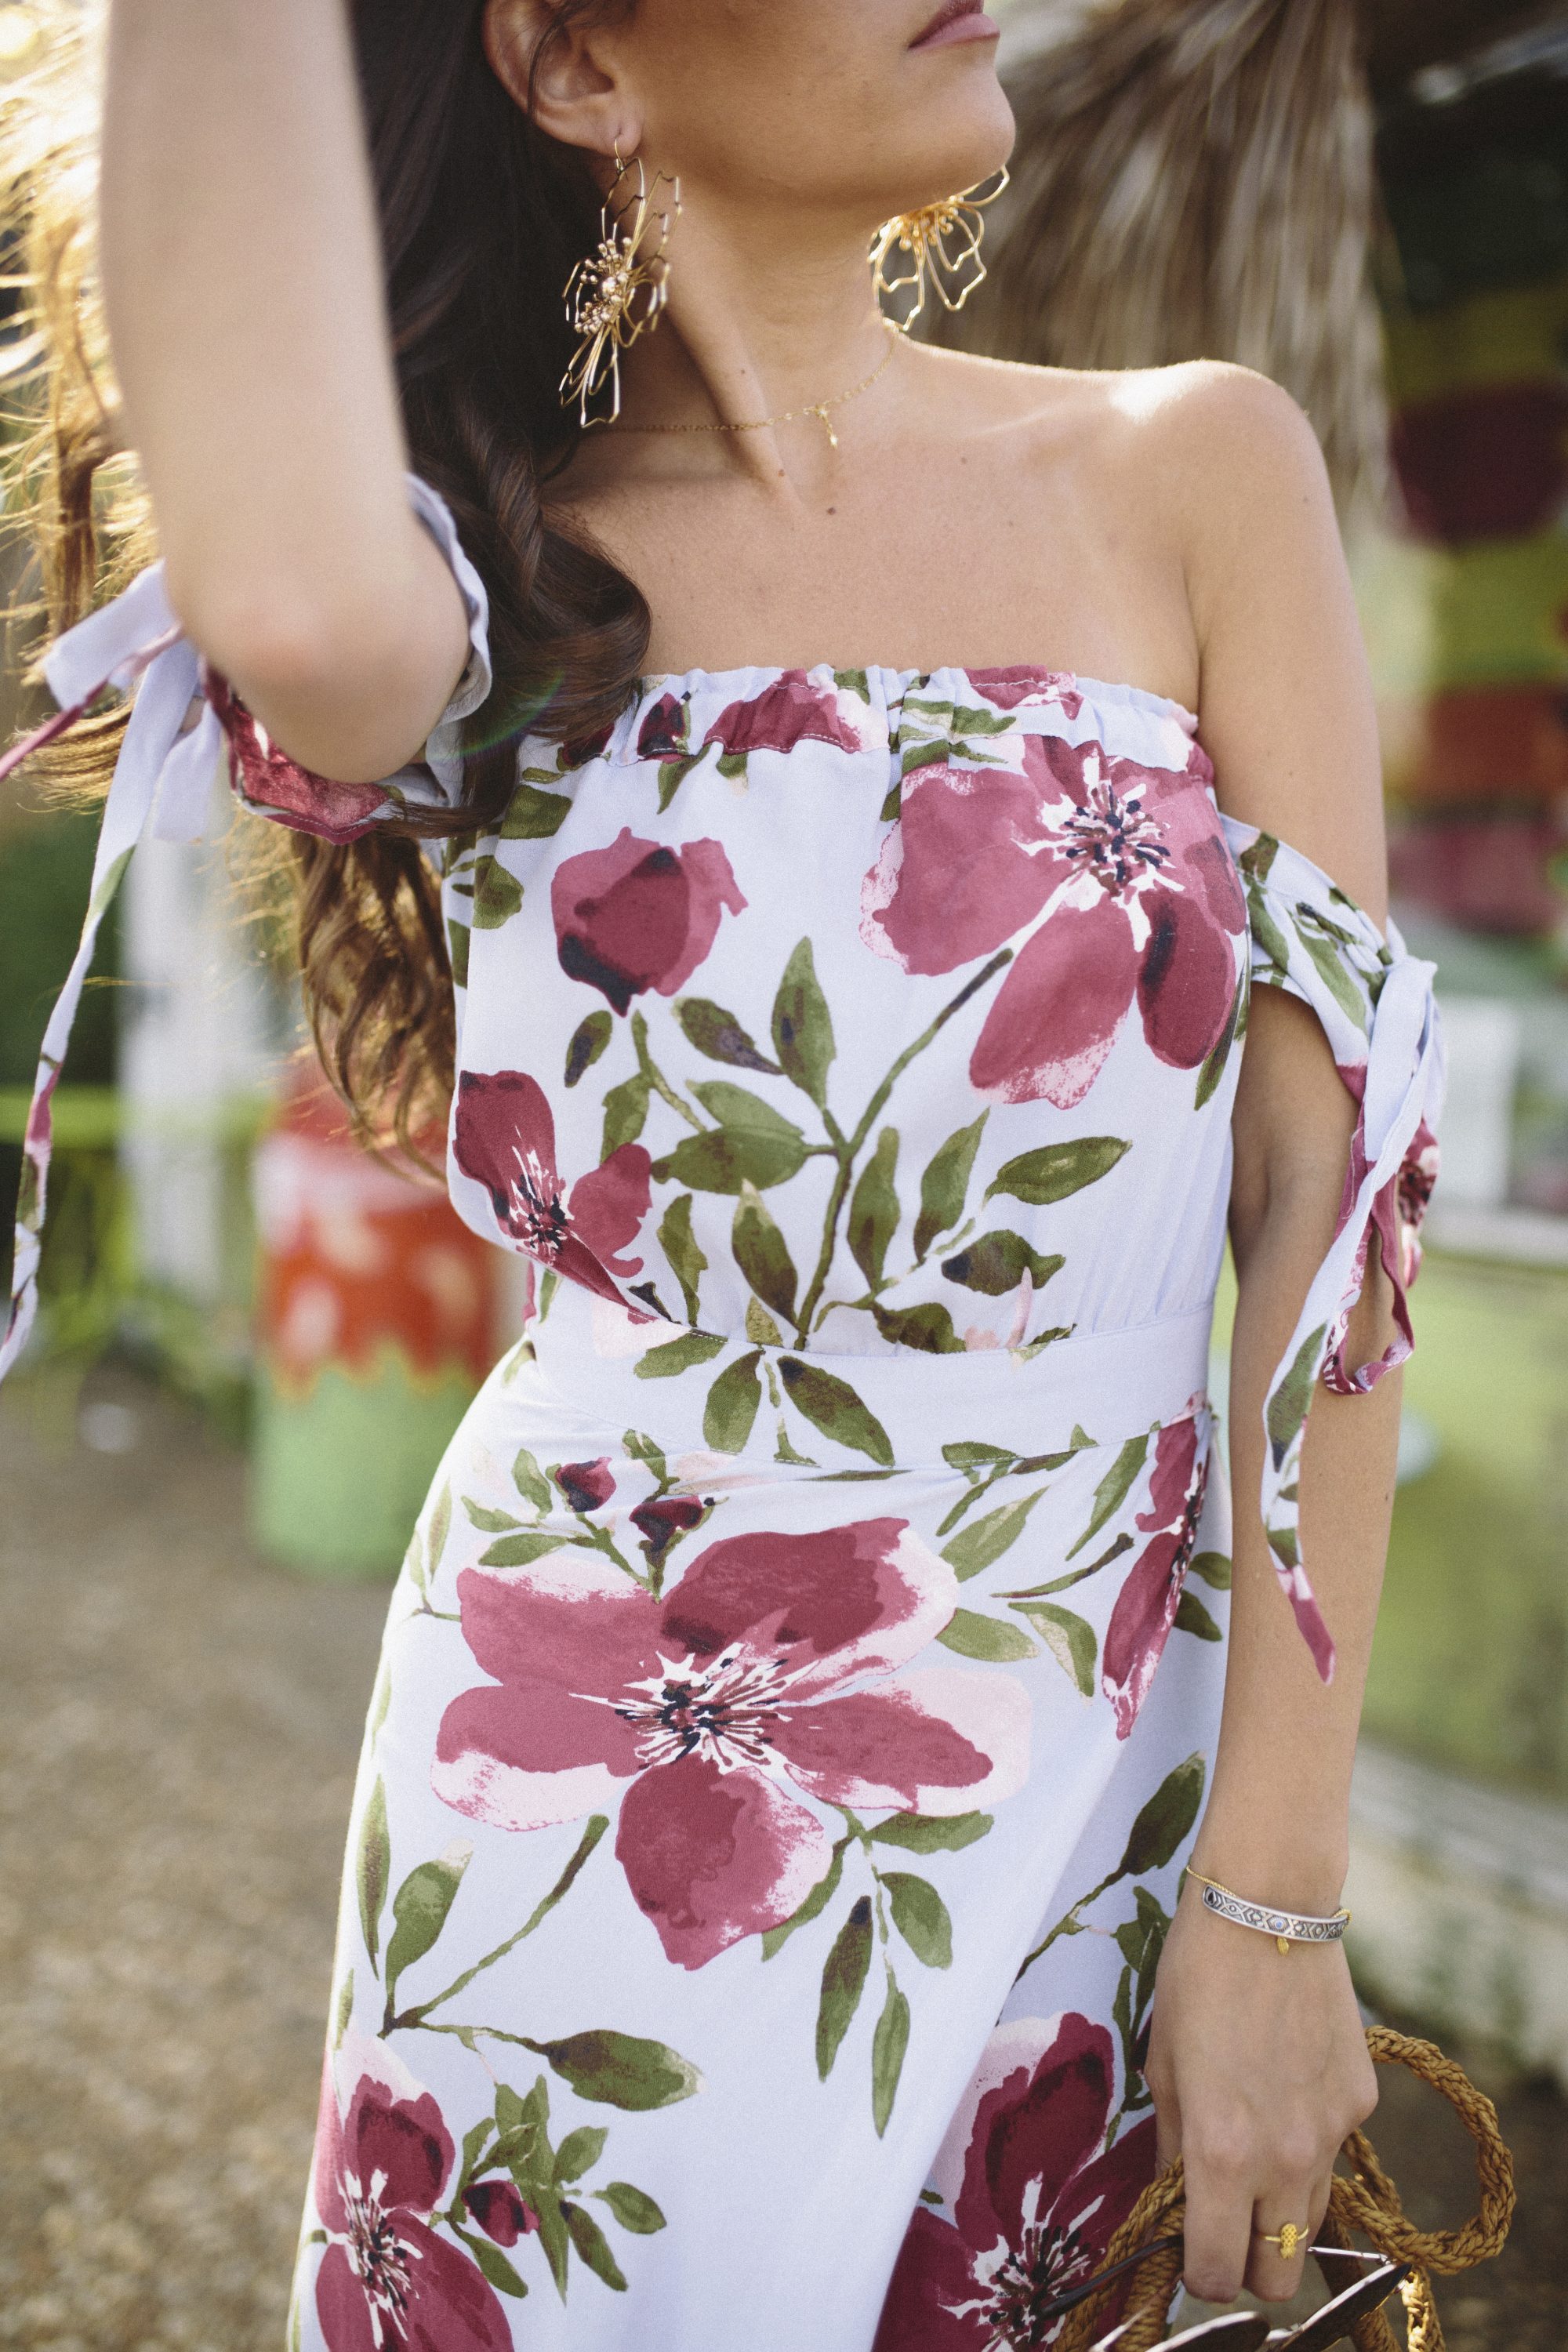 floral maxi dress, off the shoulder, summer style, summer outfit ideas, what to wear to a summer wedding, what to wear on a first date, south moon under Abbeline Off Shoulder Floral Printed Maxi Wrap Dress, baublebar Blossom Drop Earrings, straw bucket bag, atlanta style blogger